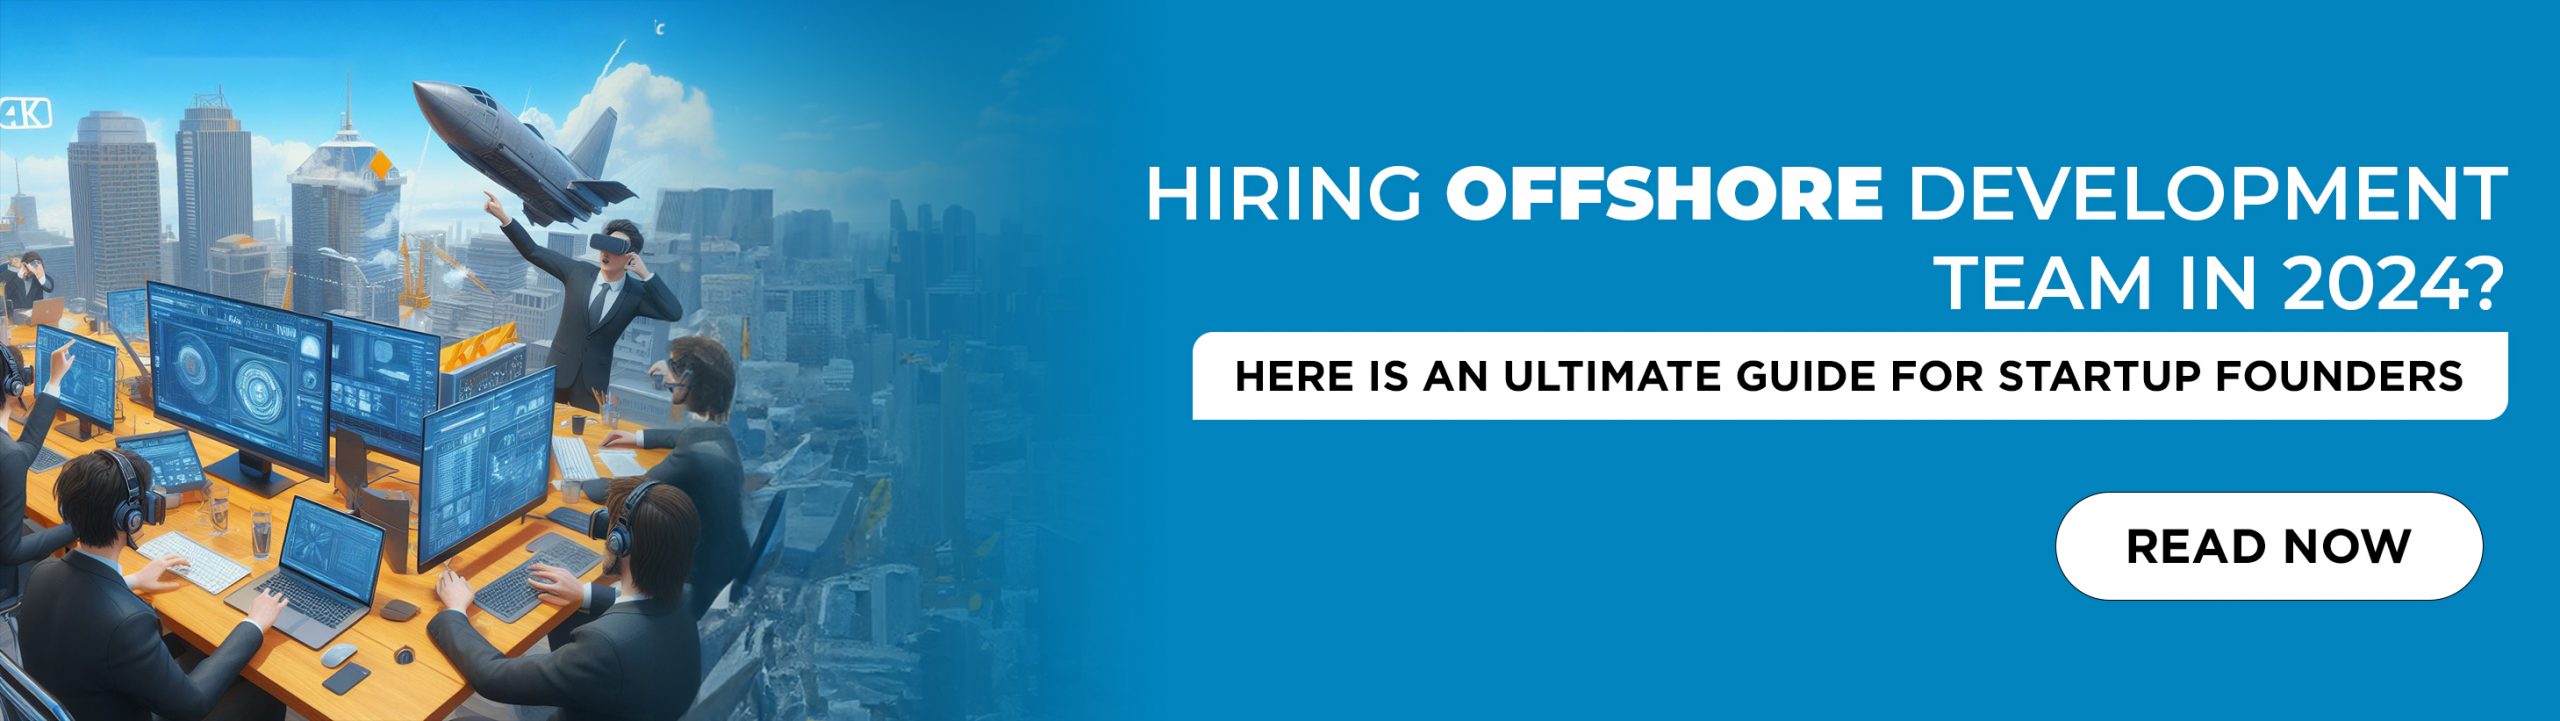 Hiring Offshore Development-Recovered-Recovered